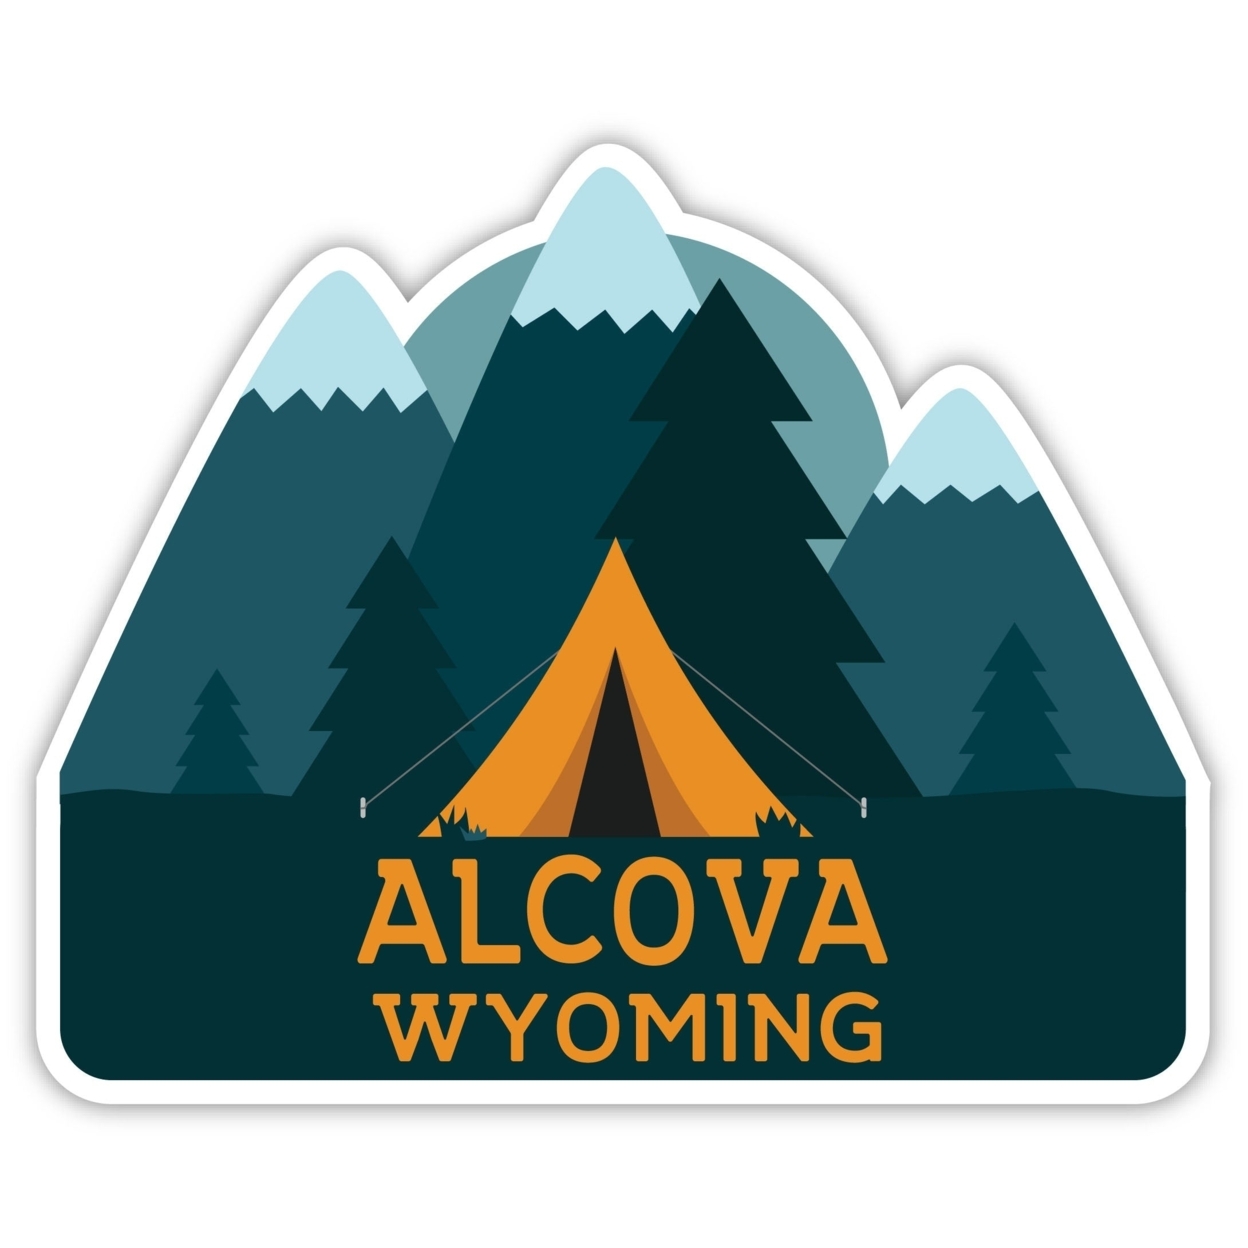 Alcova Wyoming Souvenir Decorative Stickers (Choose Theme And Size) - 4-Pack, 2-Inch, Tent